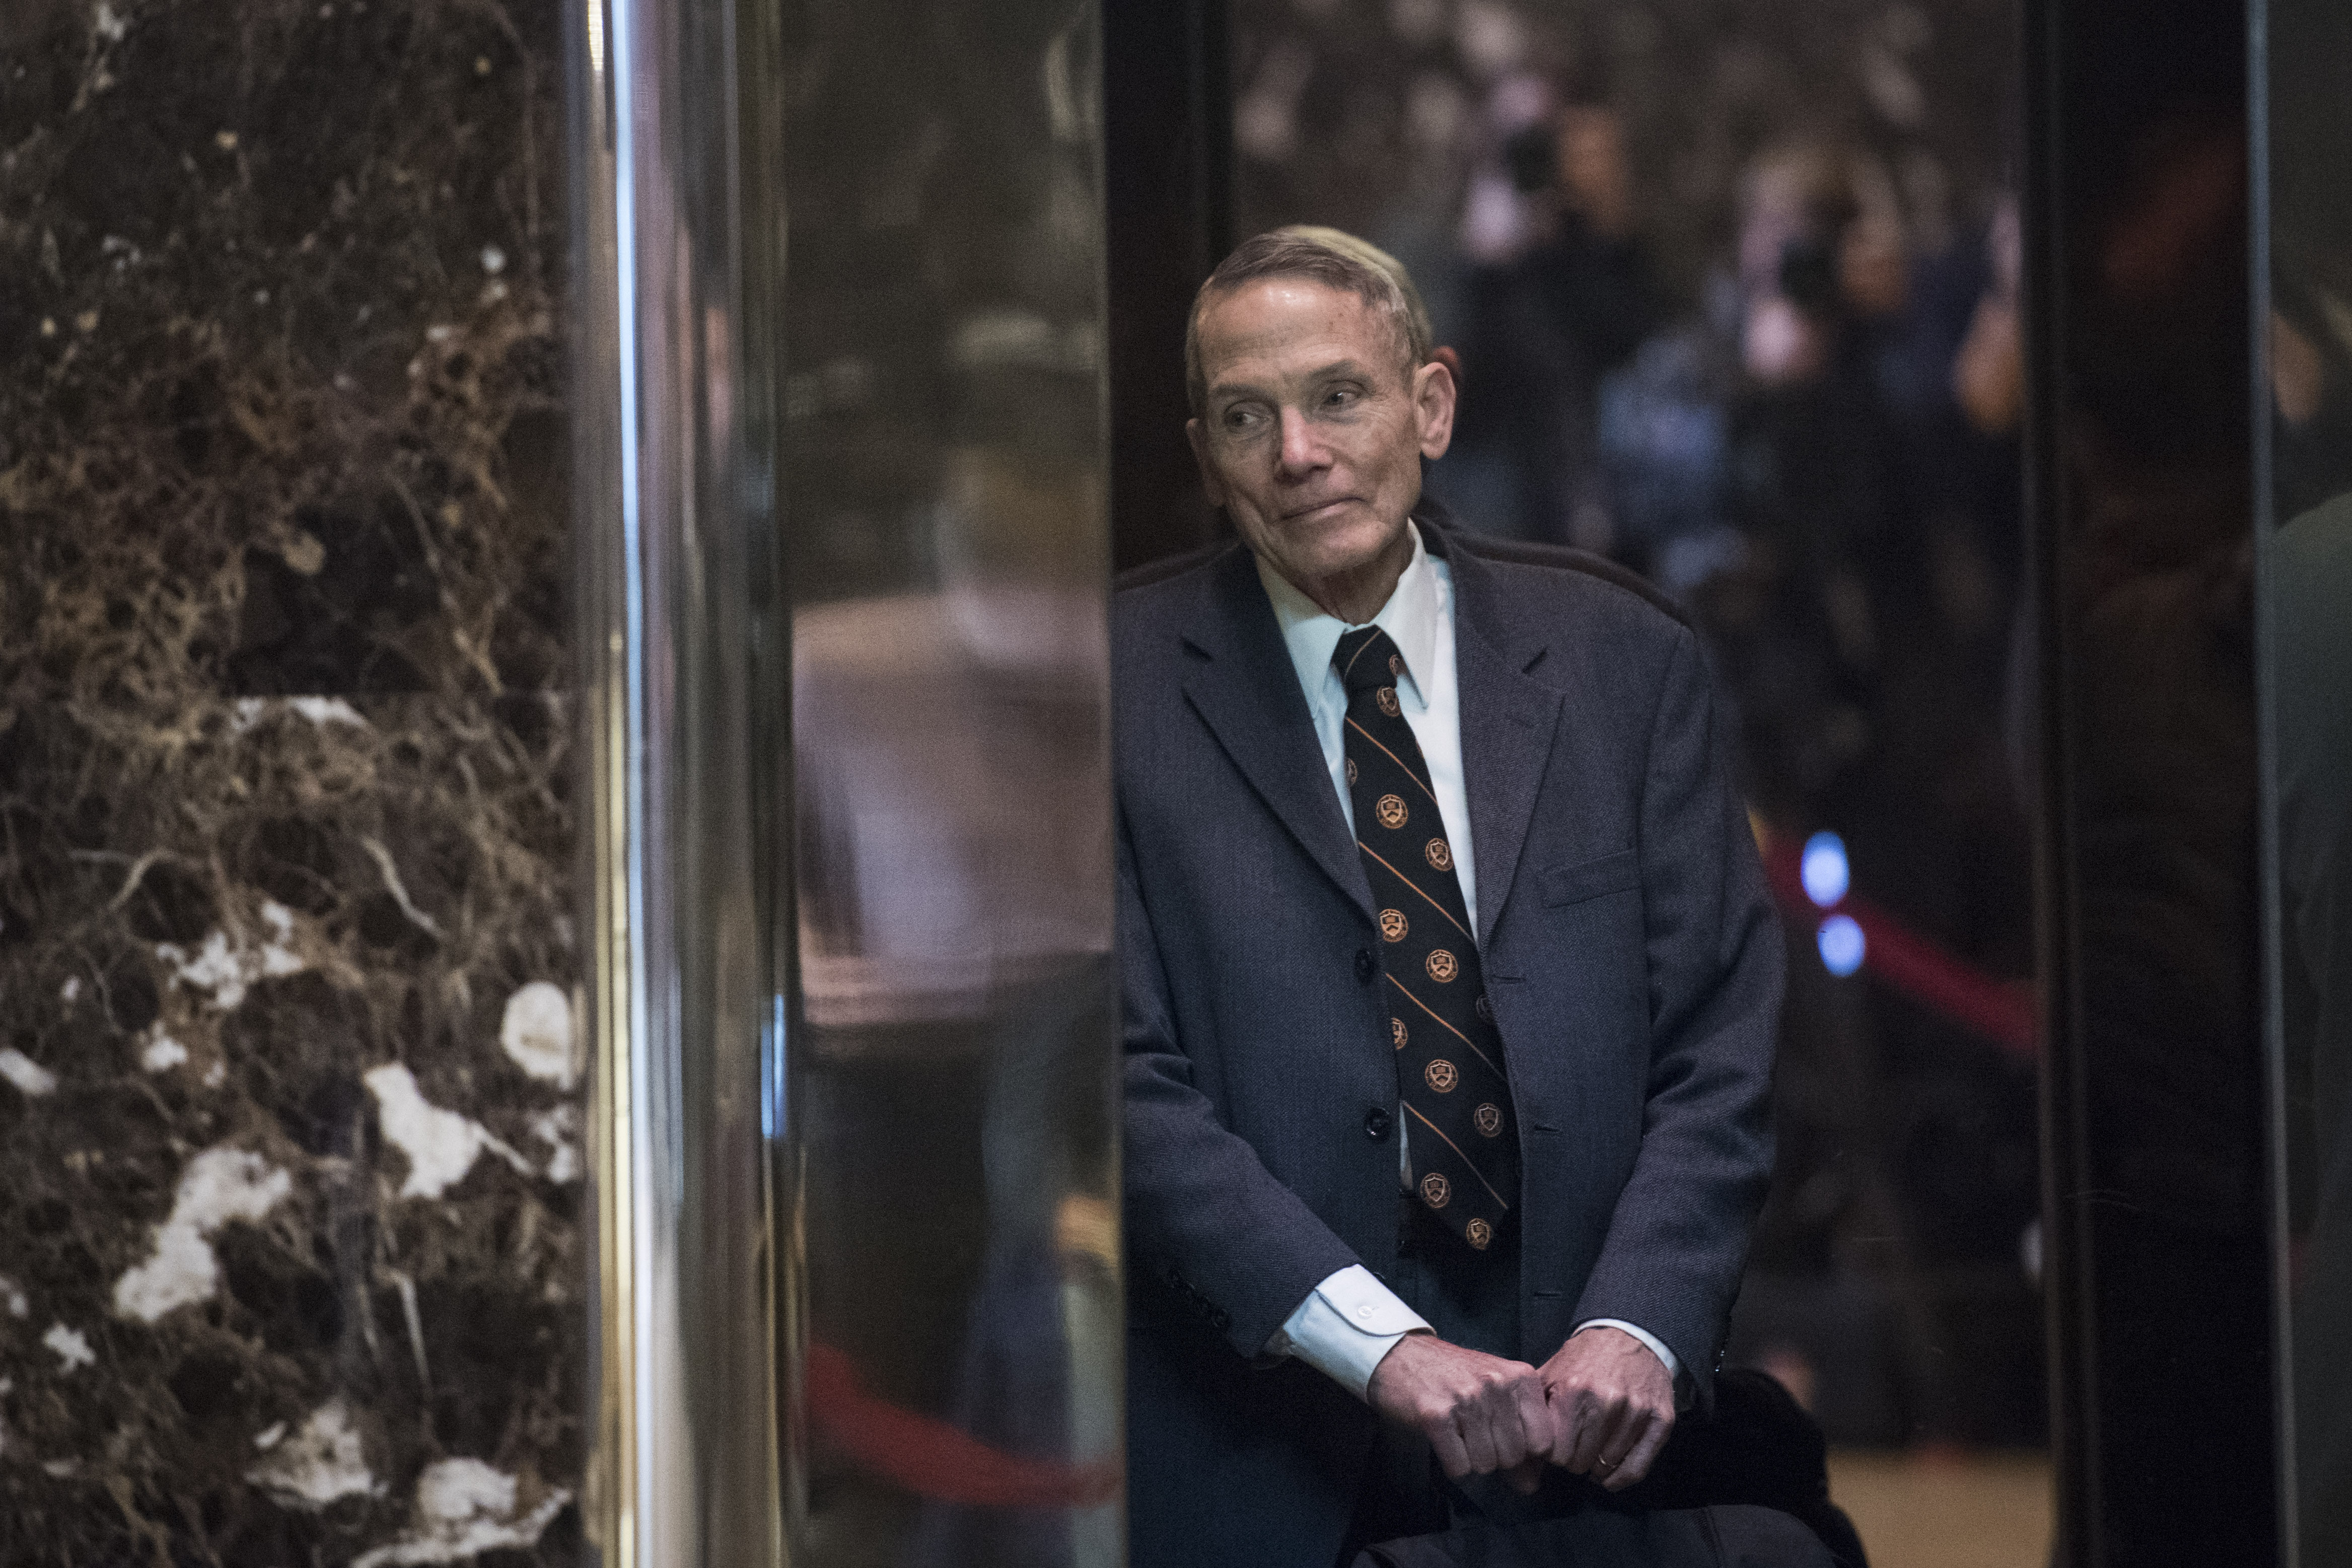 Physicist William Happer in the lobby of Trump Tower in New York.